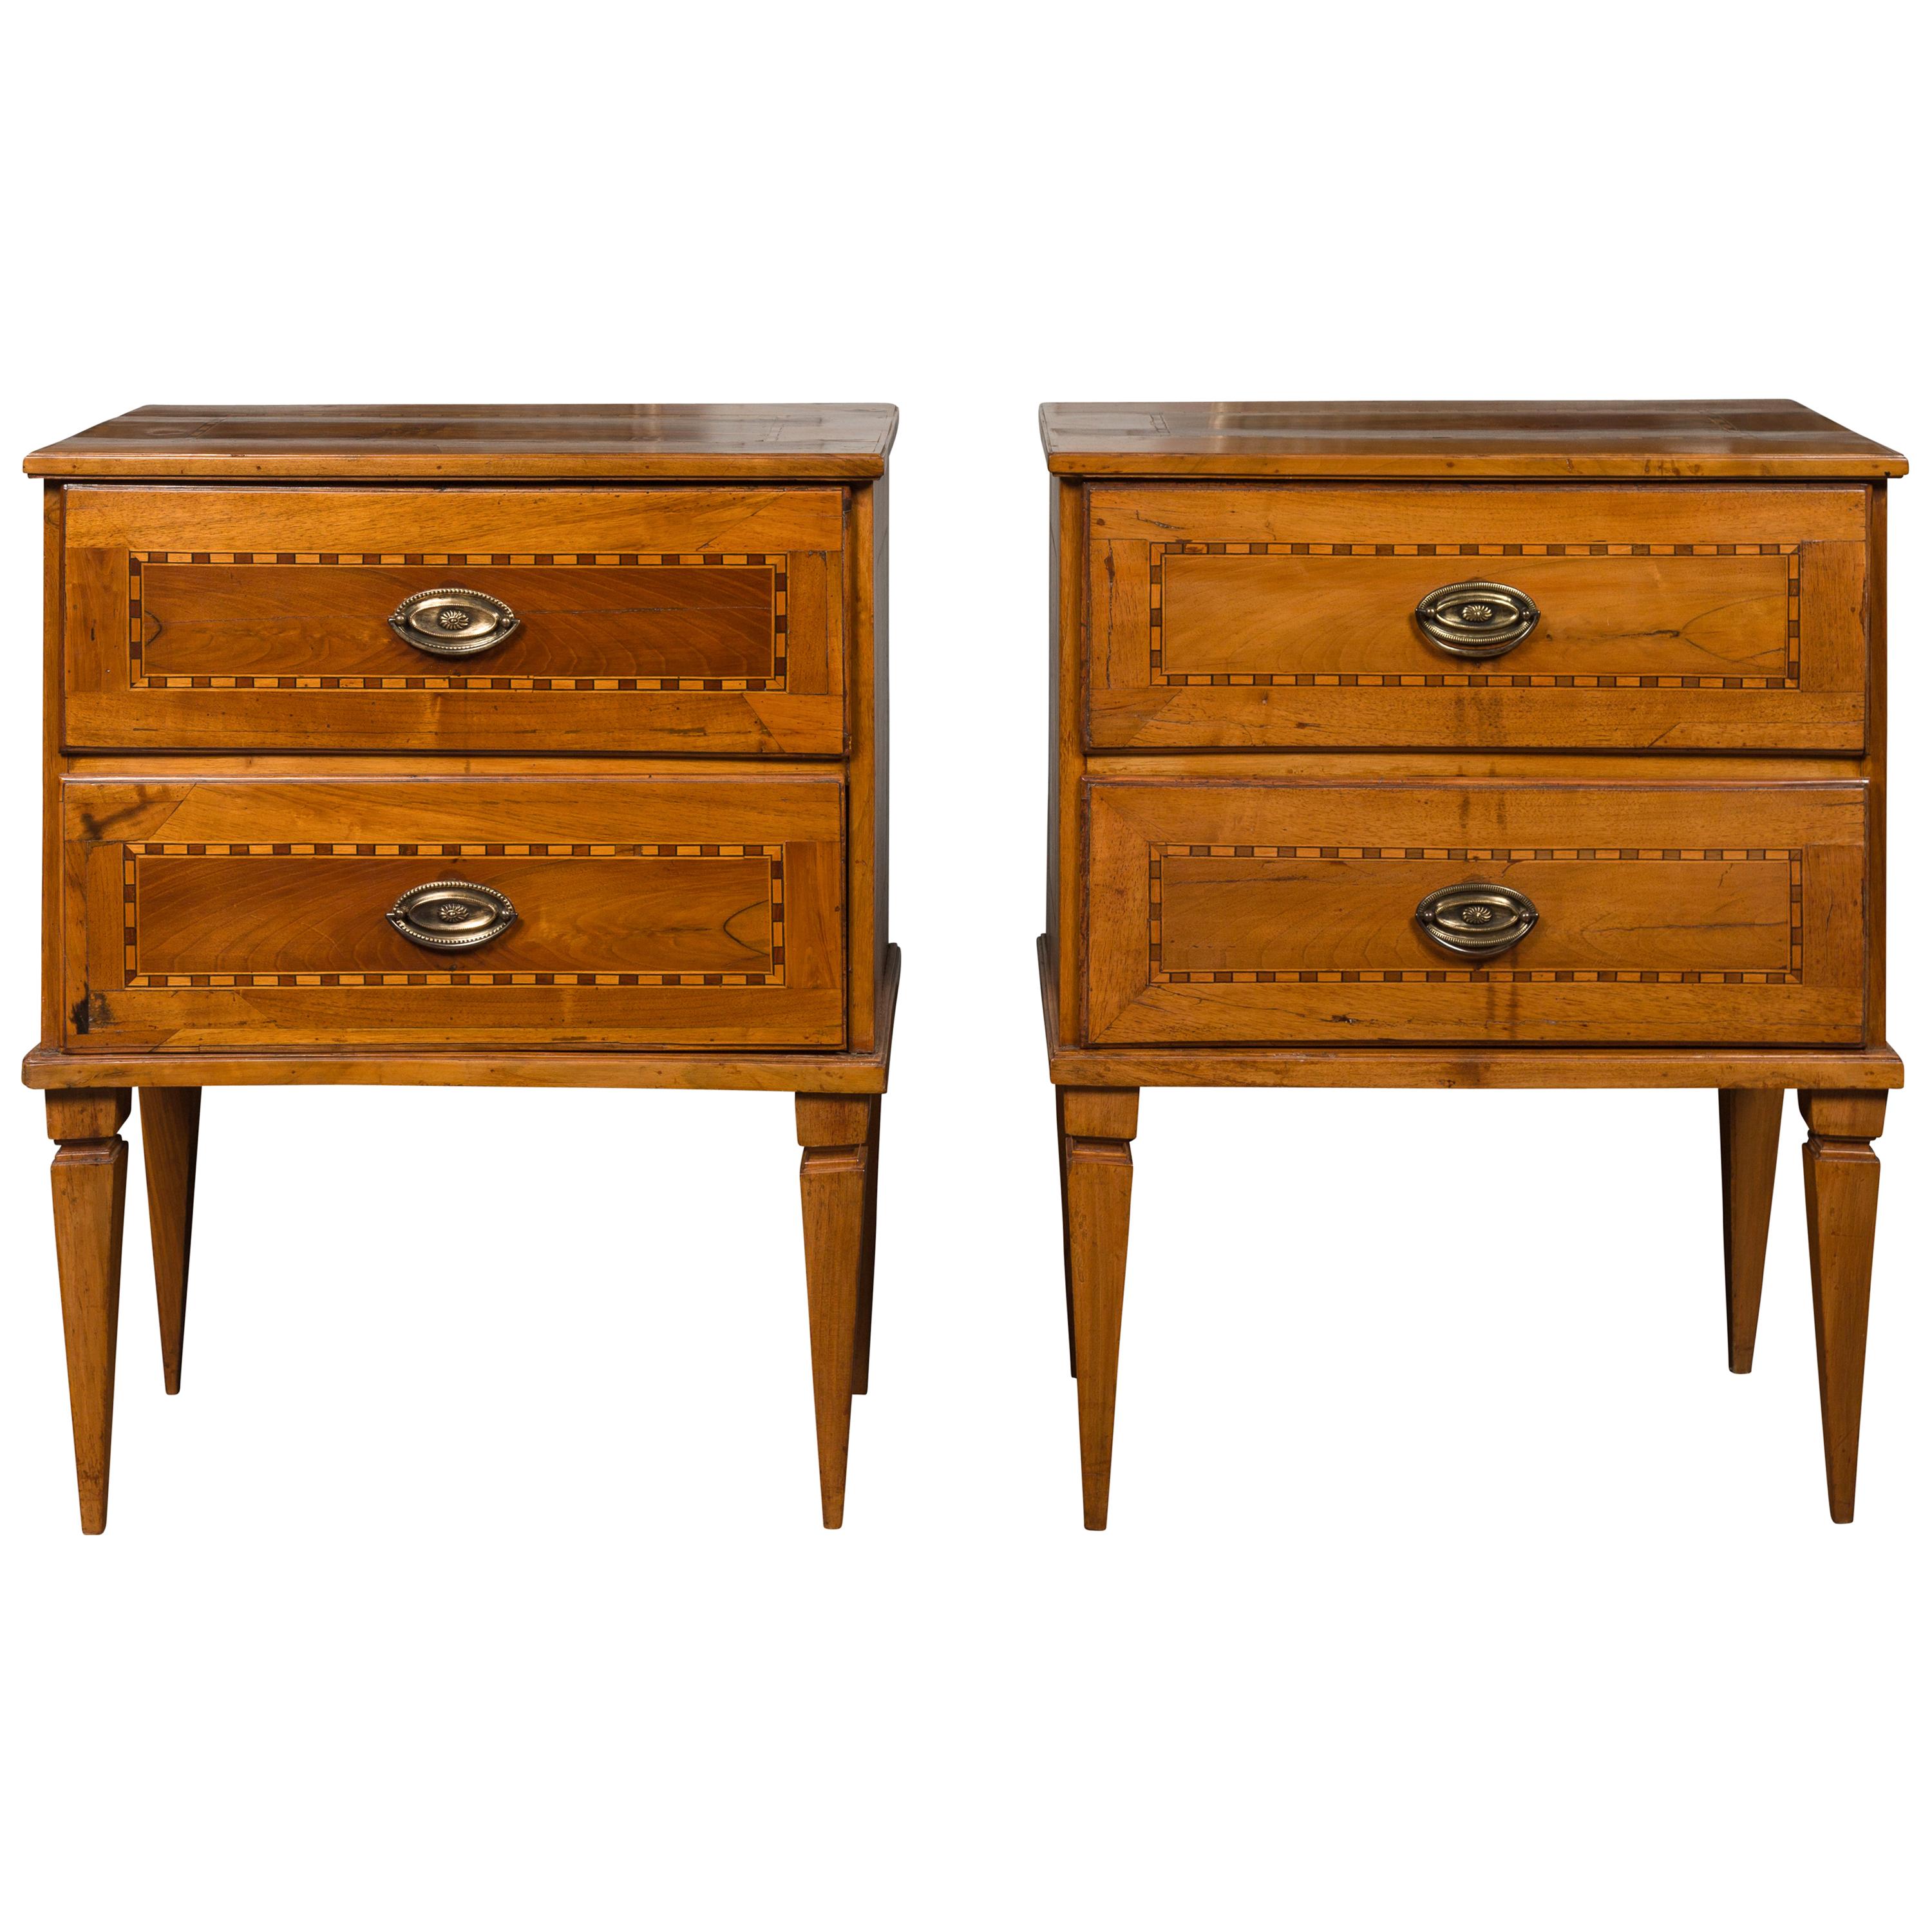 Pair of Italian 1850s Neoclassical Style Walnut Two-Drawer Commodes with Inlay